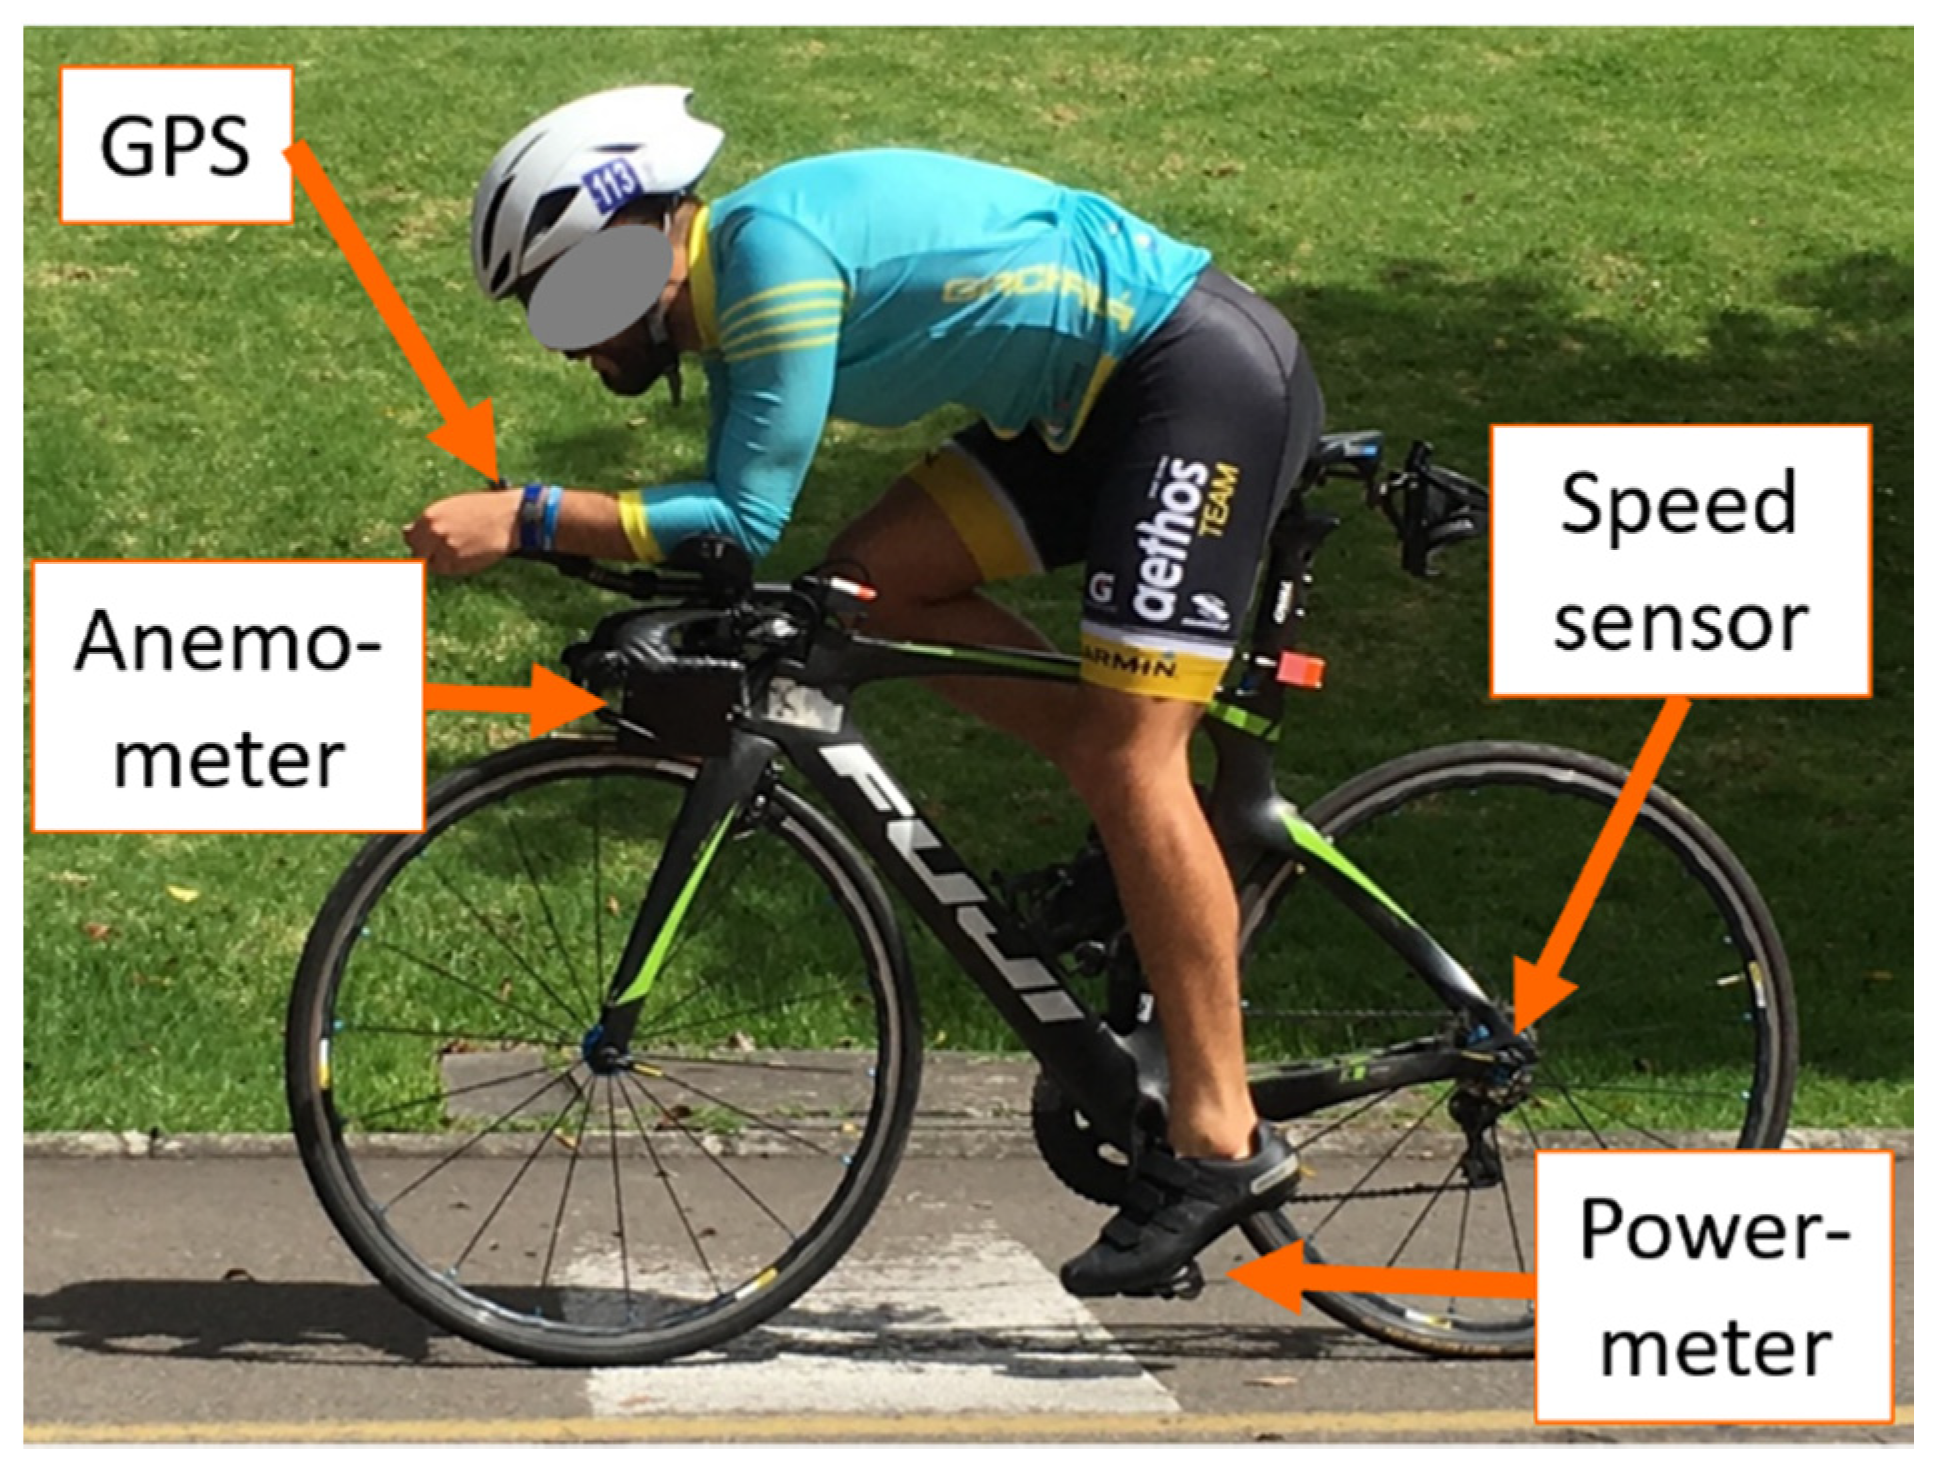 Optimizing all Road Riding Positions 